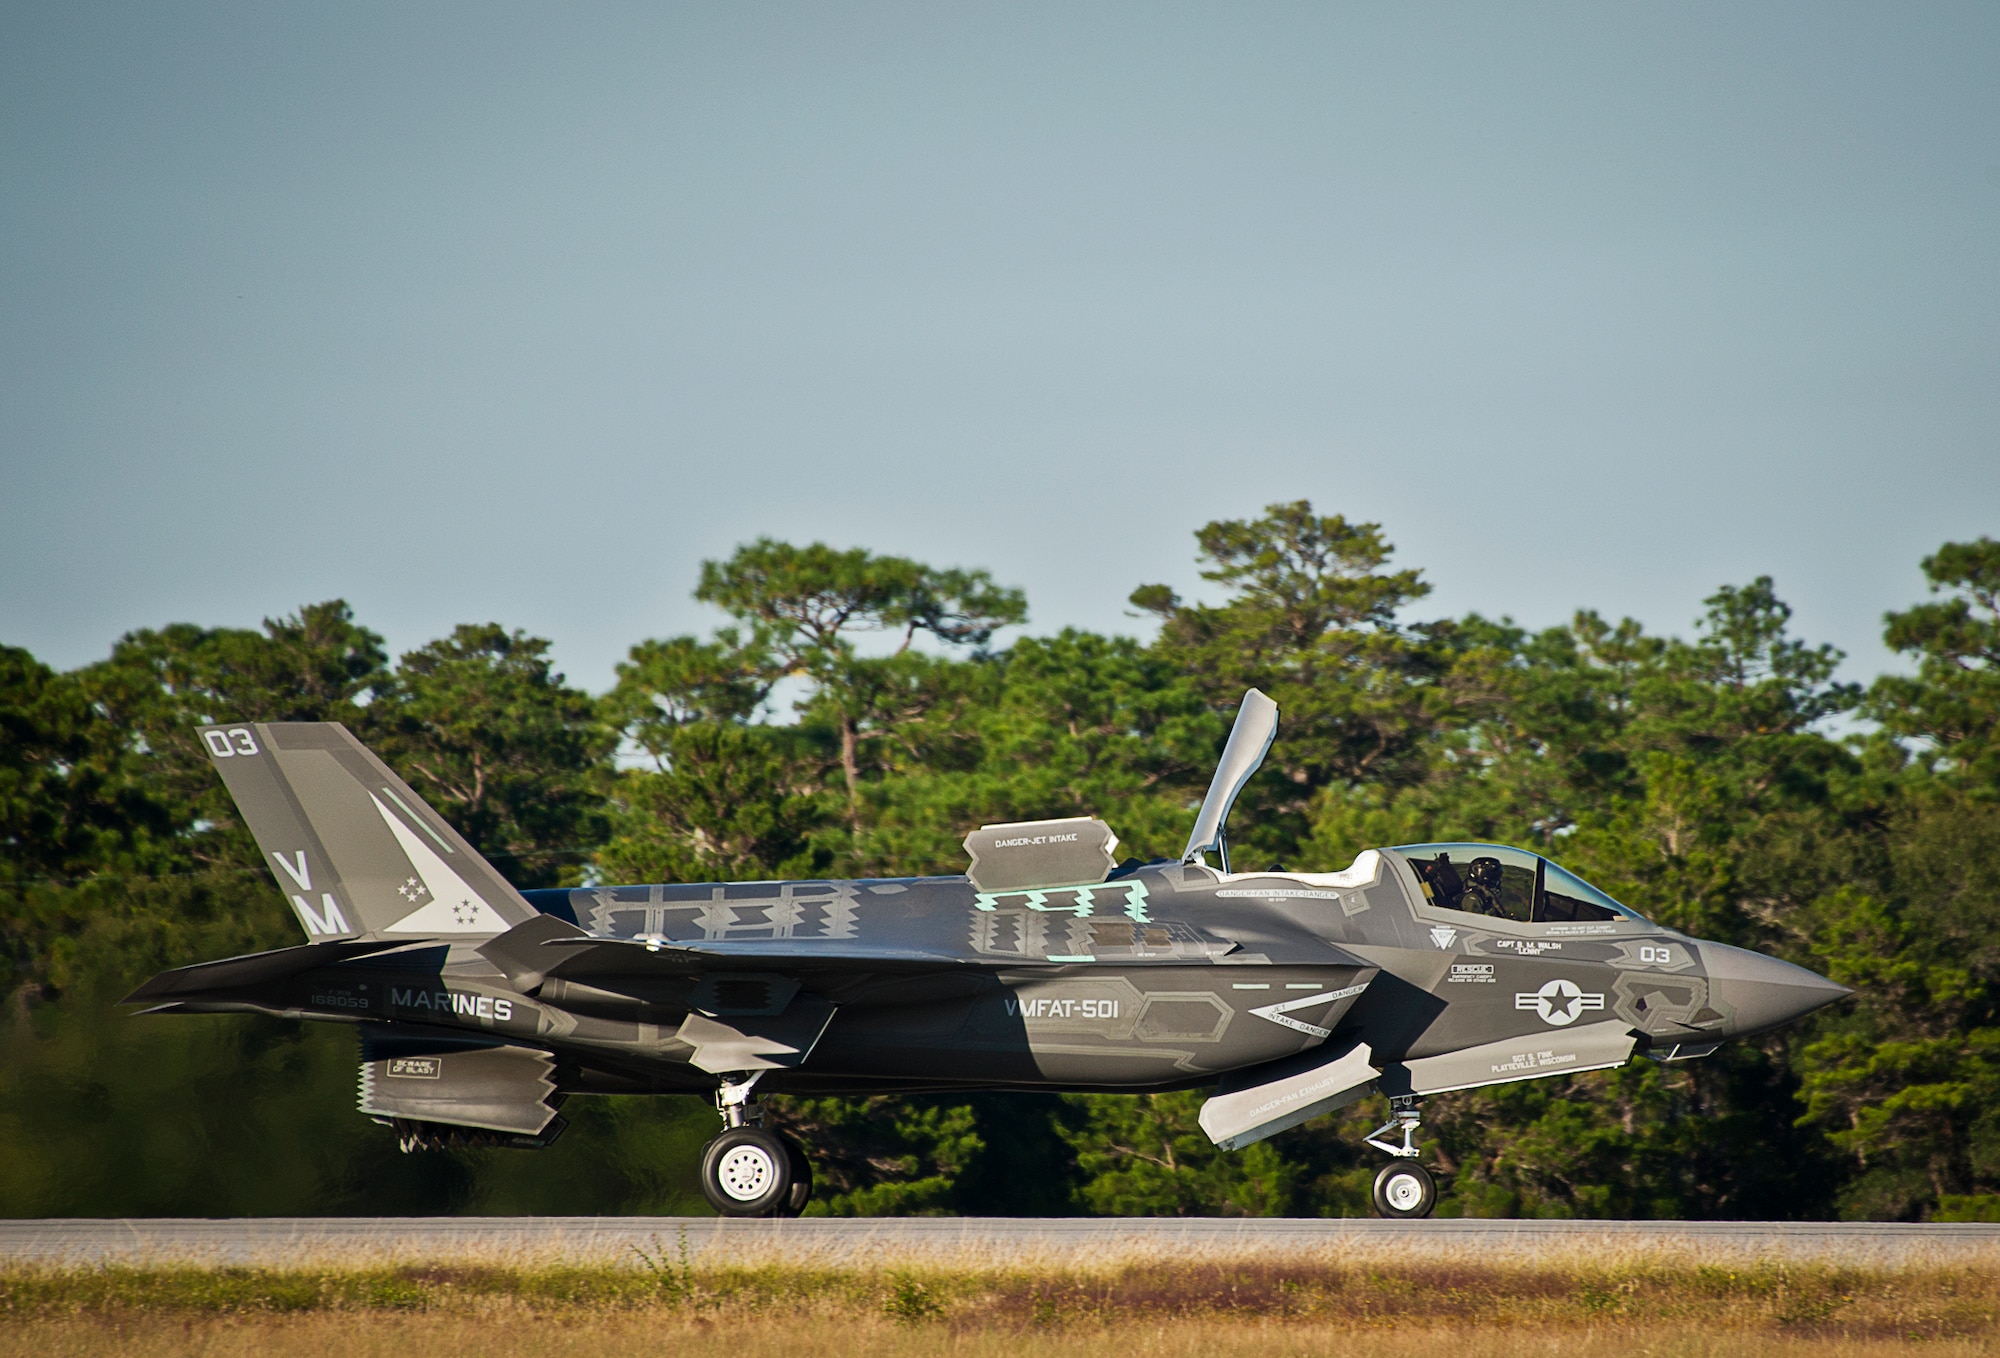 A Marine F-35B joint strike fighter makes an approach to the runway during the first short take-off and vertical landing mission at Eglin Air Force Base, Fla., Oct. 25. The milestone training mission was flown by Maj. Brendan M. Walsh, of the Marine Fighter Attack Training Squadron-501.Walsh recently qualified in vertical landing operations at Marine Corps Air Station Yuma, Ariz. in preparation for this mission.(U.S. Air Force photo/Samuel King Jr.)